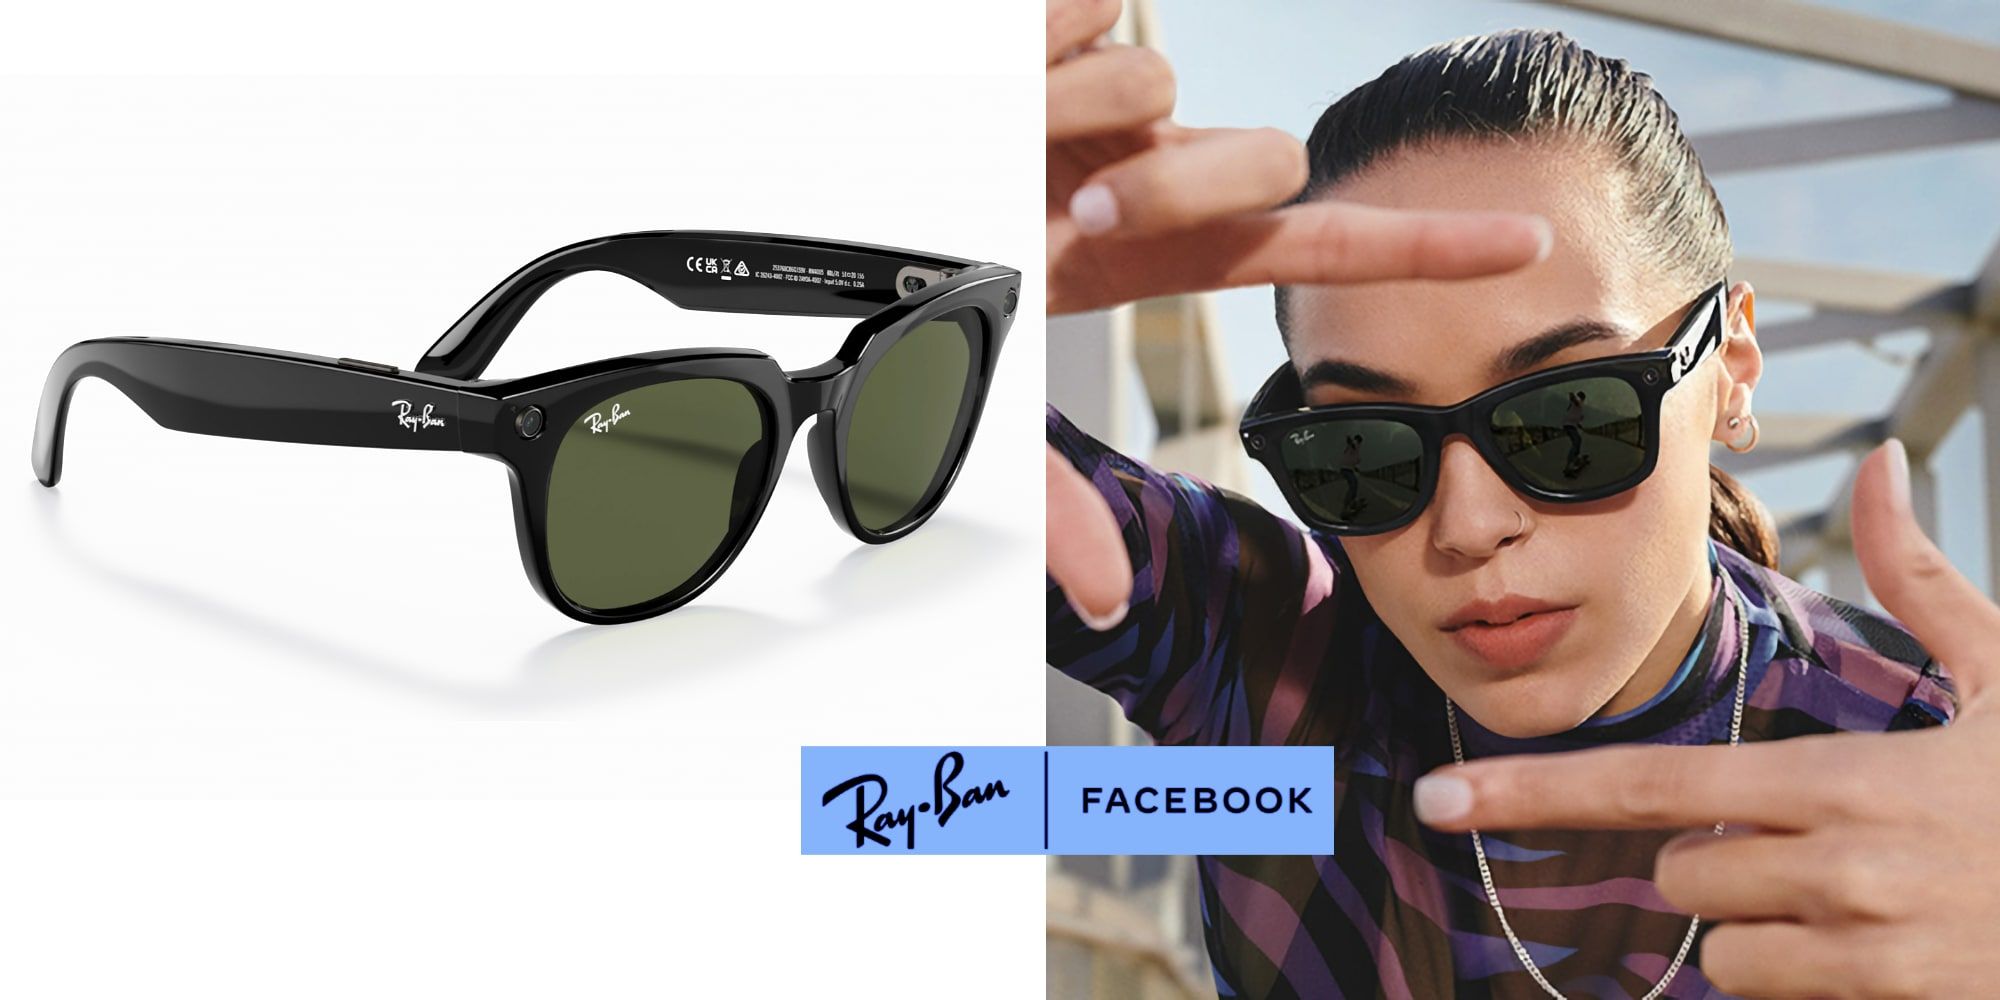 Facebook's Ray-Ban Stories: What You Need To Know Before Buying